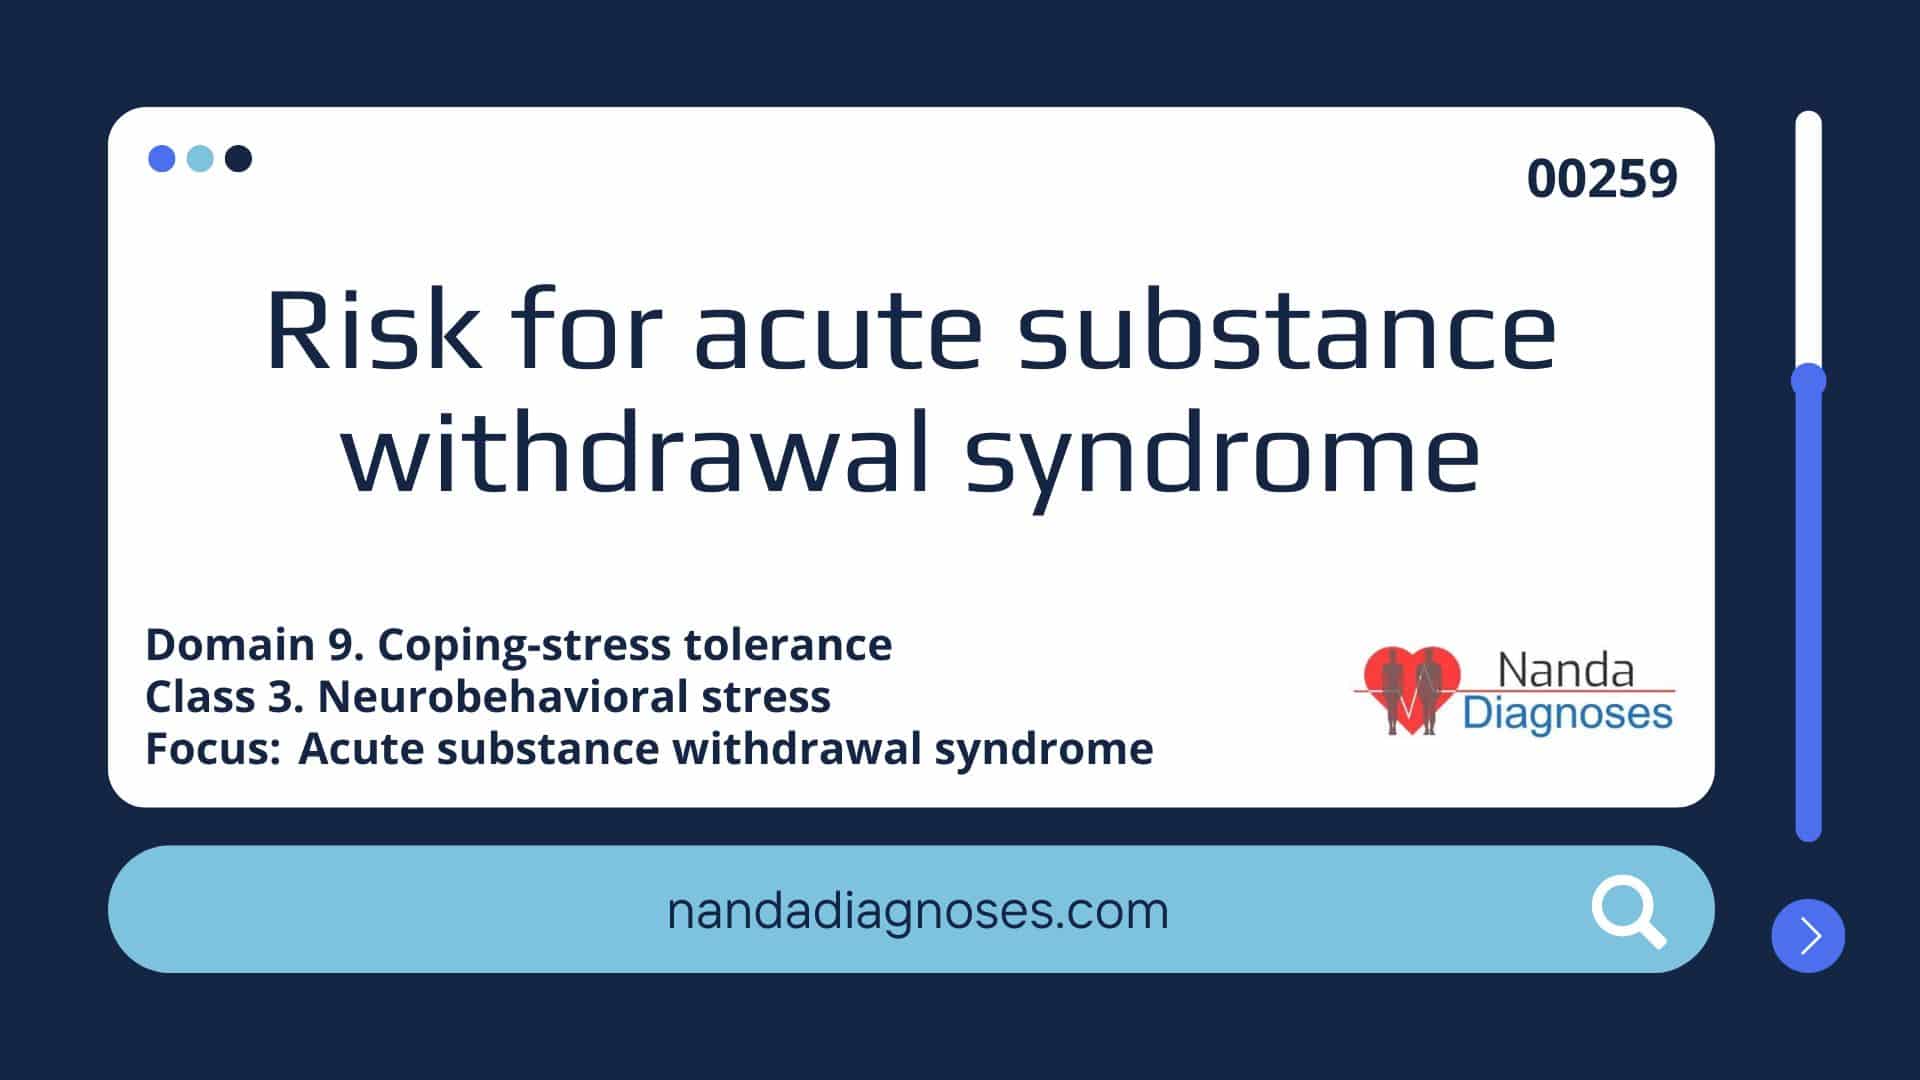 Nursing diagnosis Risk for acute substance withdrawal syndrome